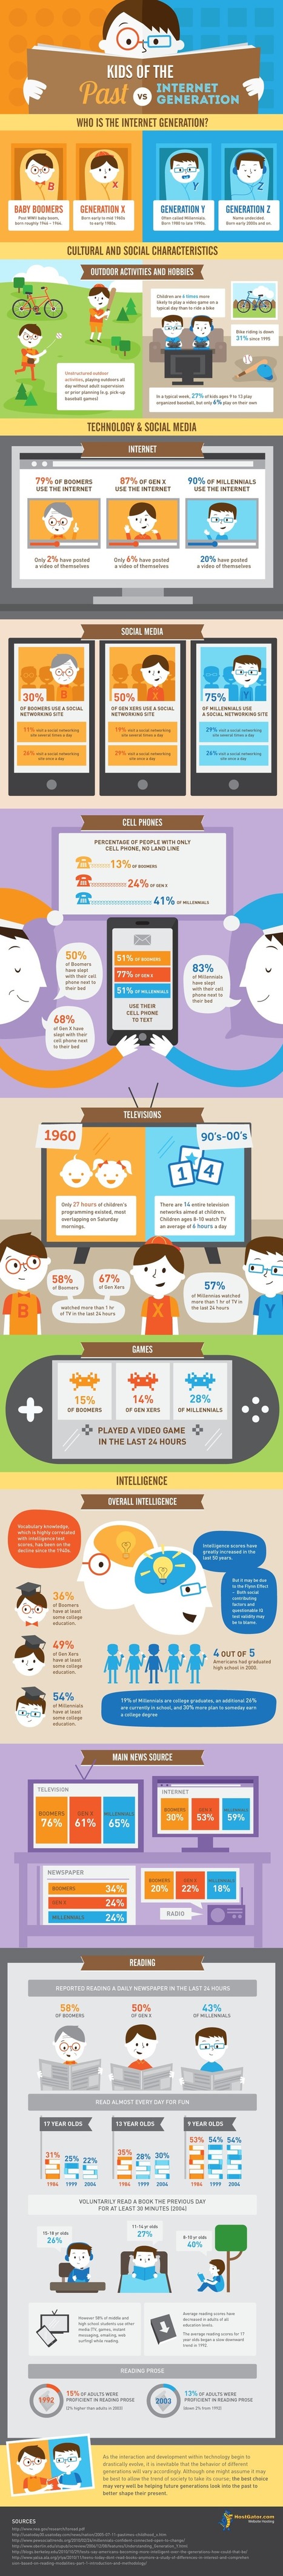 Kids of the Internet Generation vs. Everybody Else [INFOGRAPHIC] | 21st Century Learning and Teaching | Scoop.it